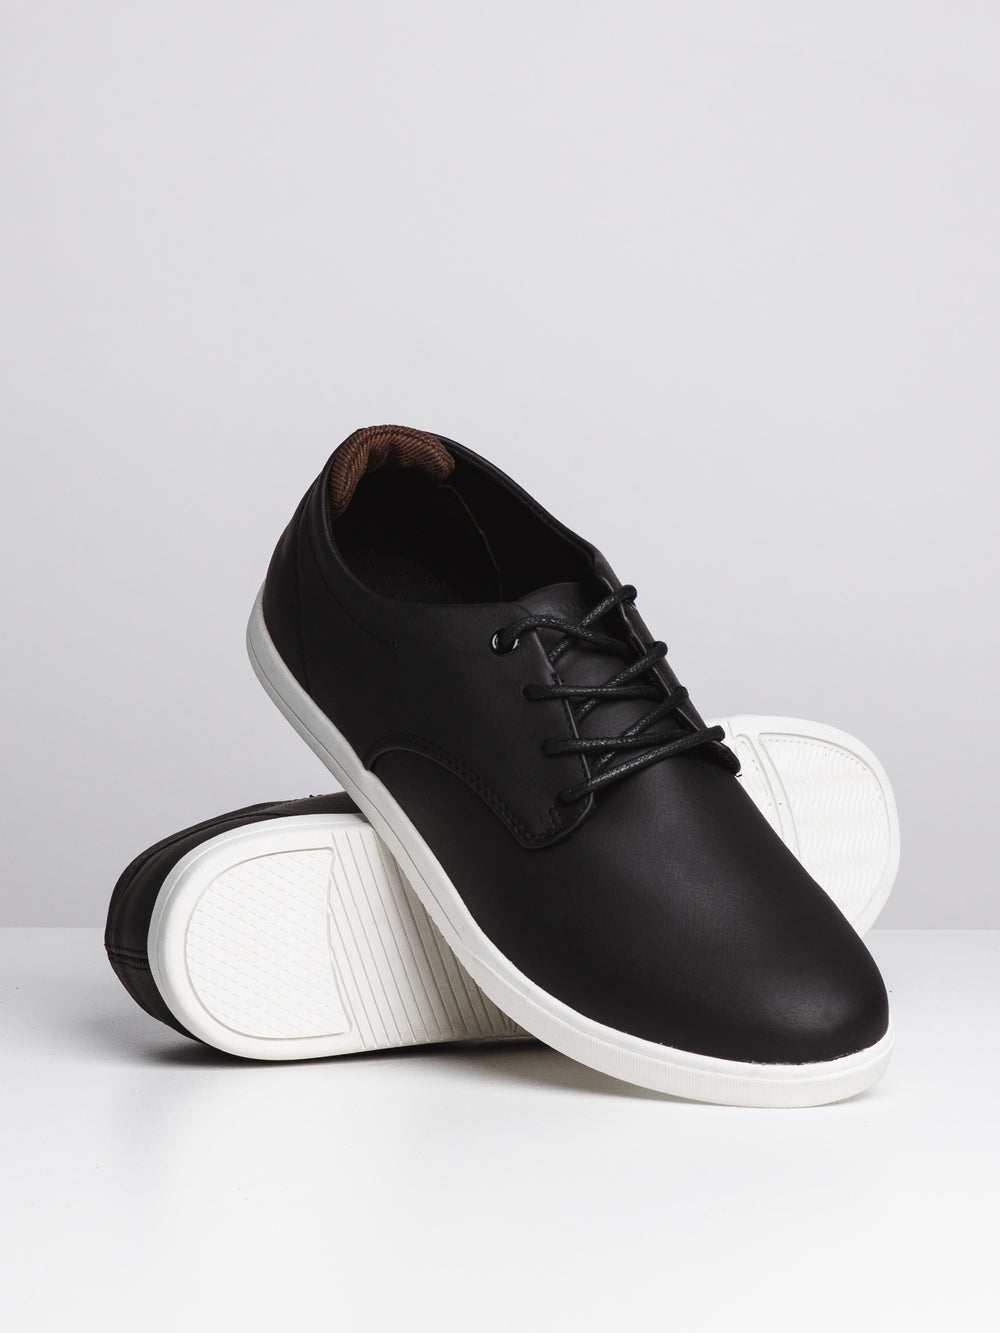 MENS PERRY - BLACK-AMA - CLEARANCE